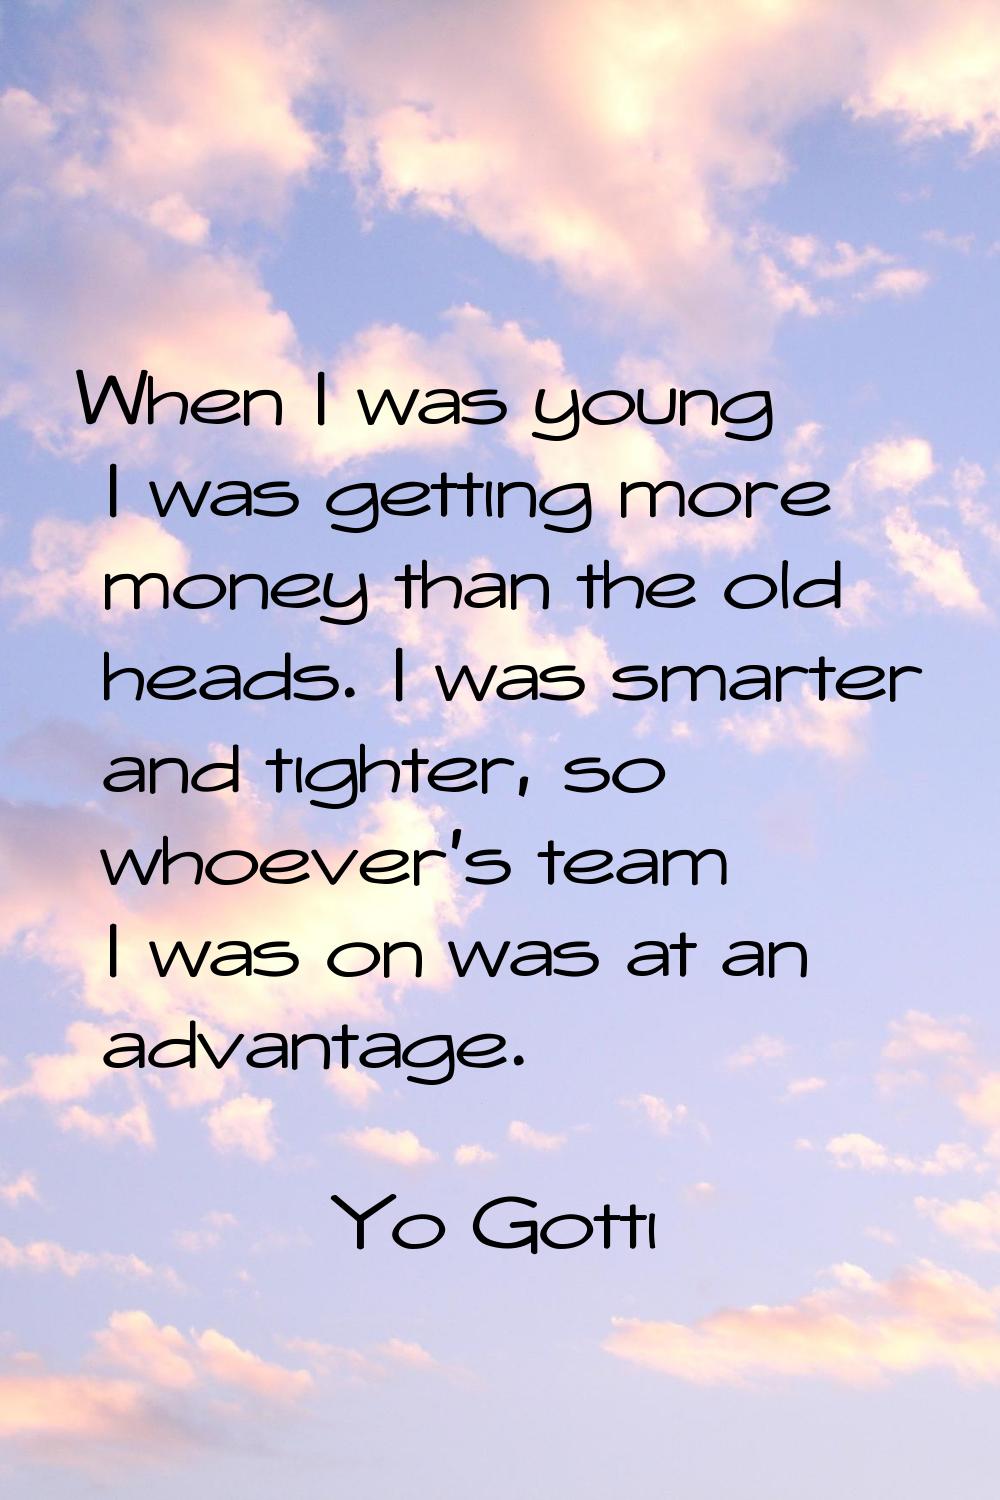 When I was young I was getting more money than the old heads. I was smarter and tighter, so whoever